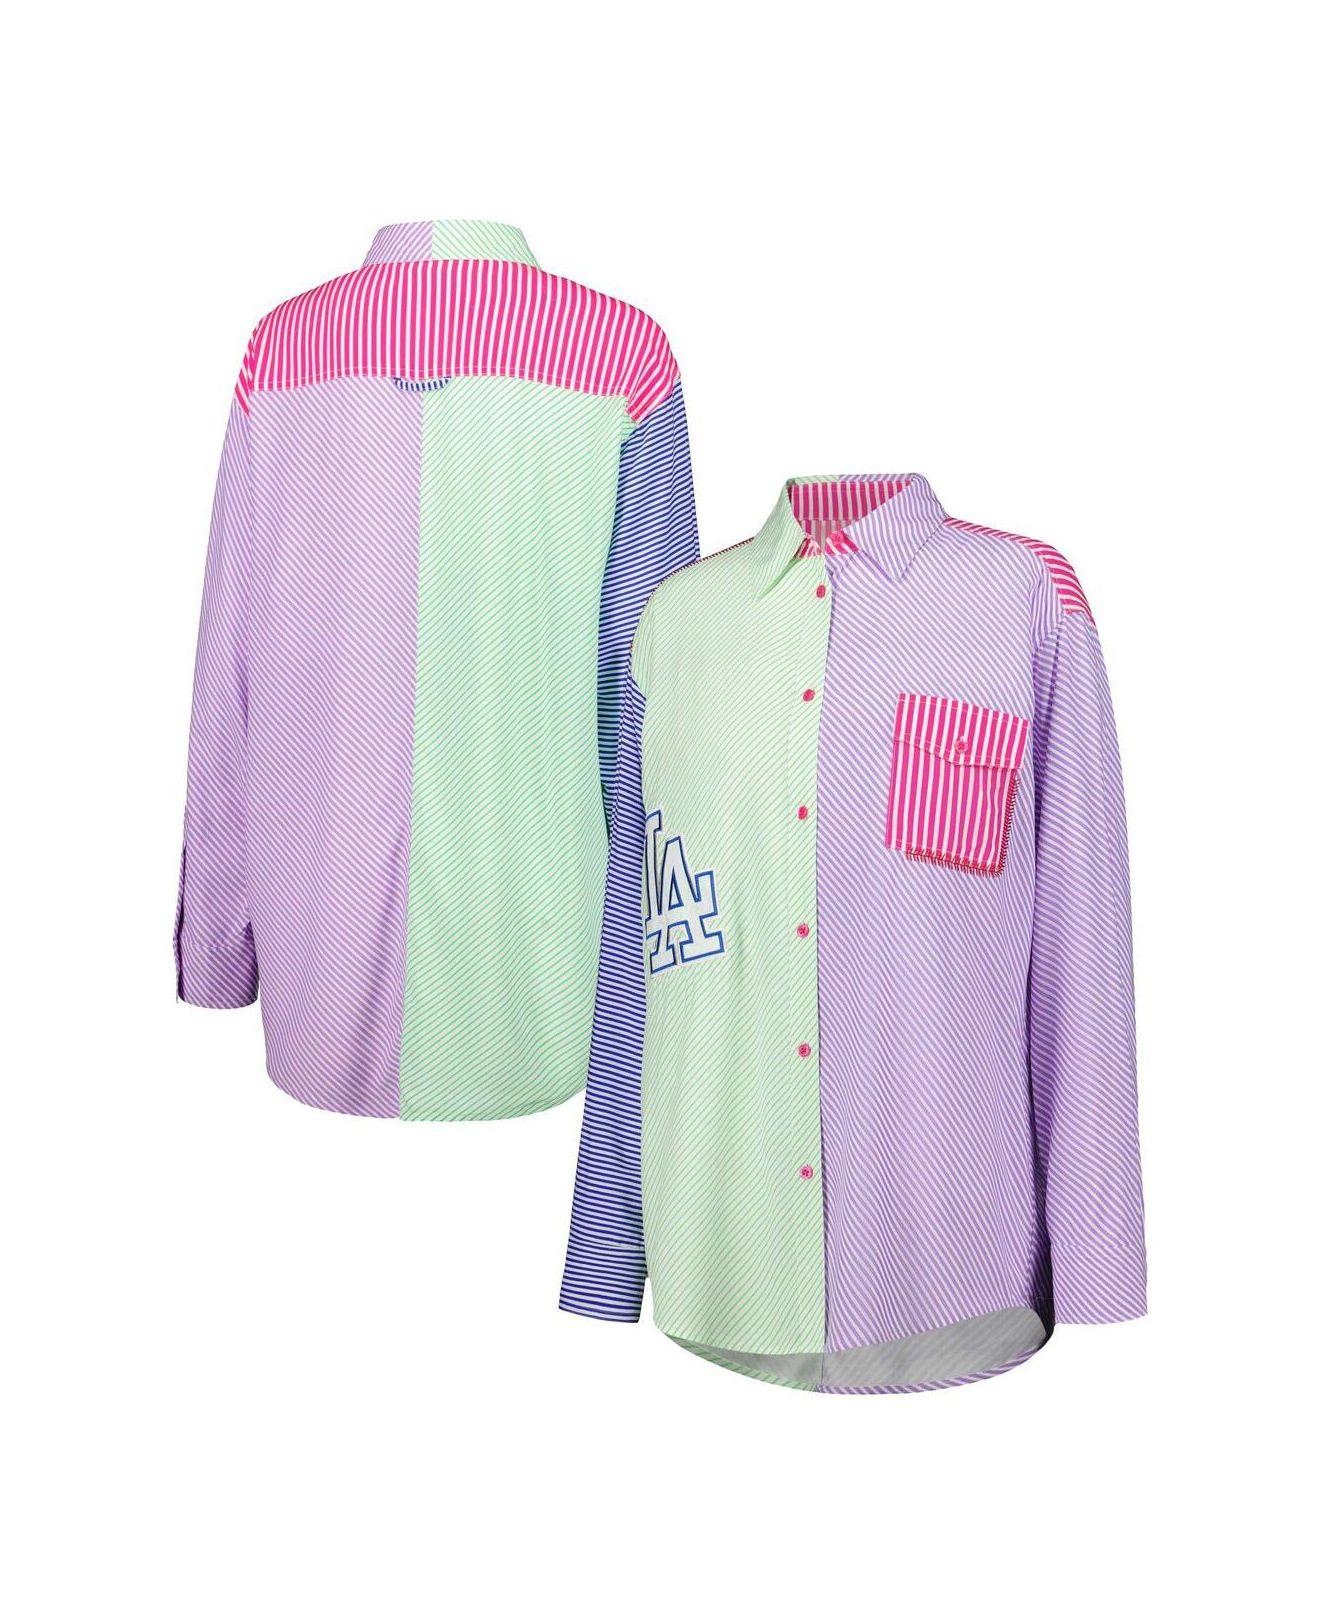 Terez Los Angeles Dodgers Button-up Shirt in Pink